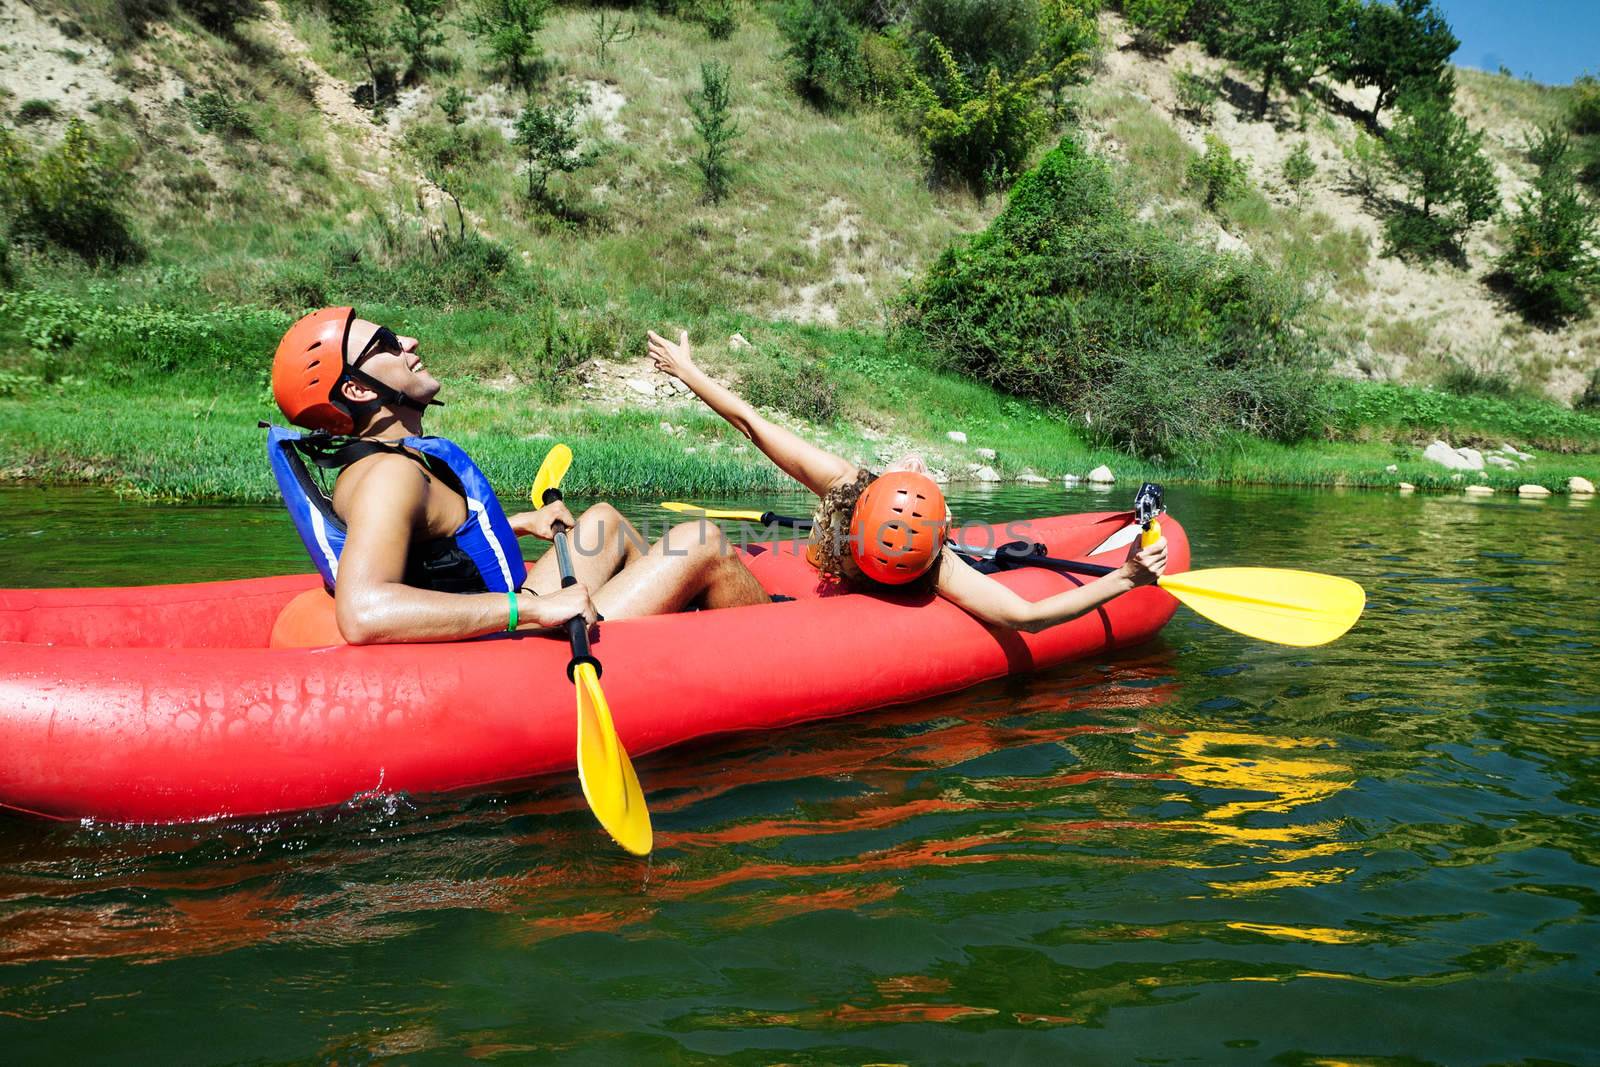 A male and female in a red inflatable canoe celebrating reaching calm waters of a river.